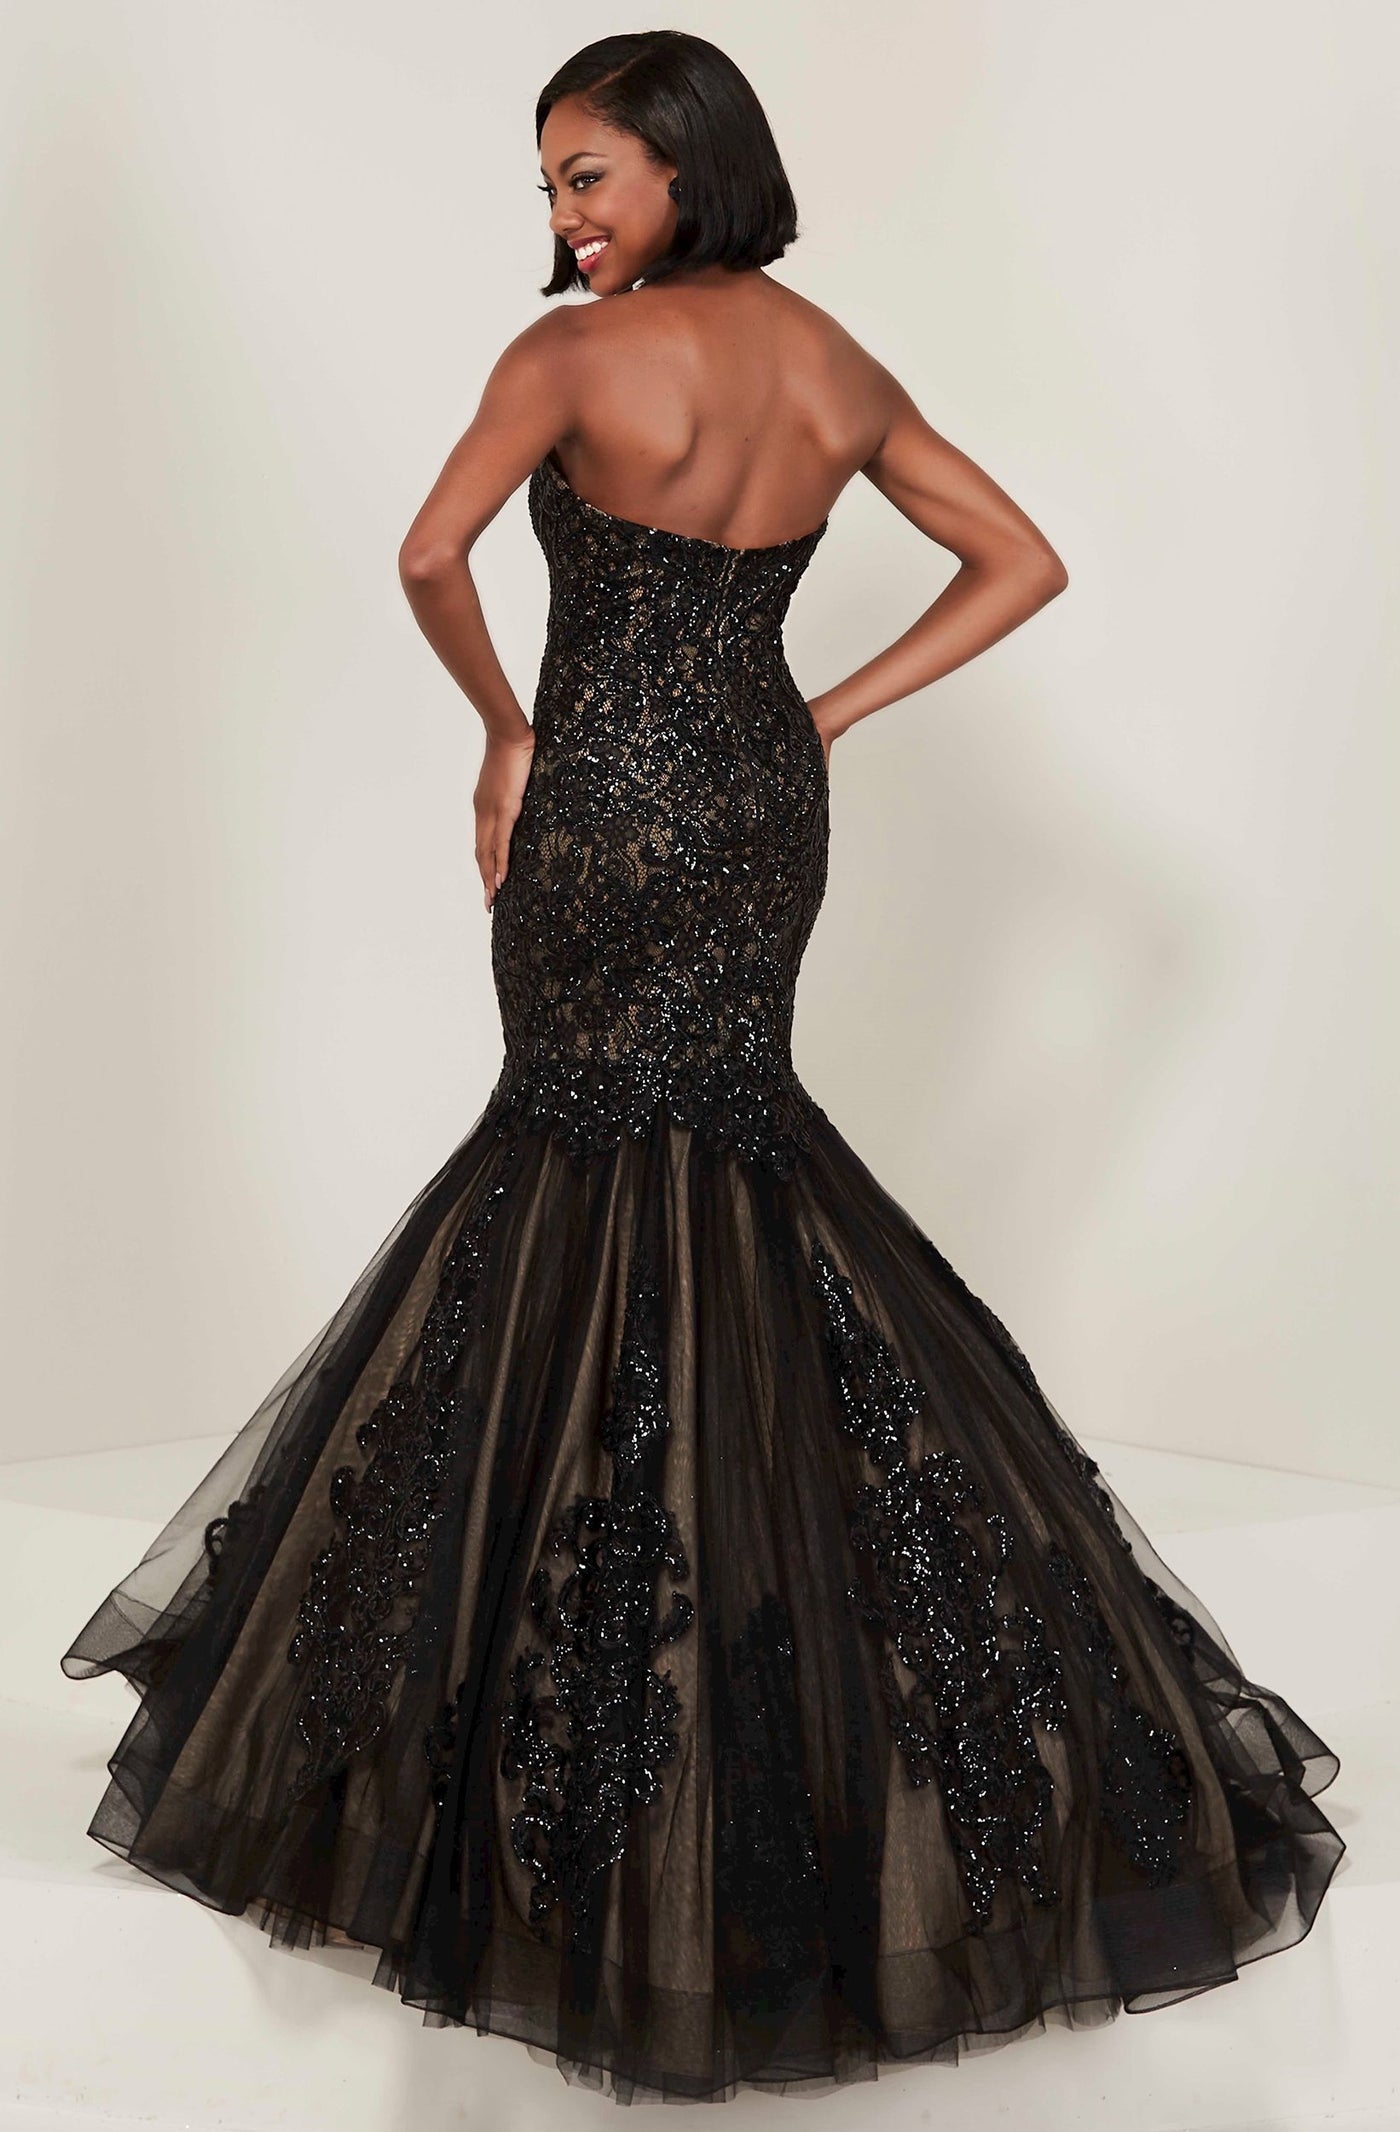 Tiffany Designs - 16356 Sequined Lace Tulle Mermaid Dress In Black and Neutral